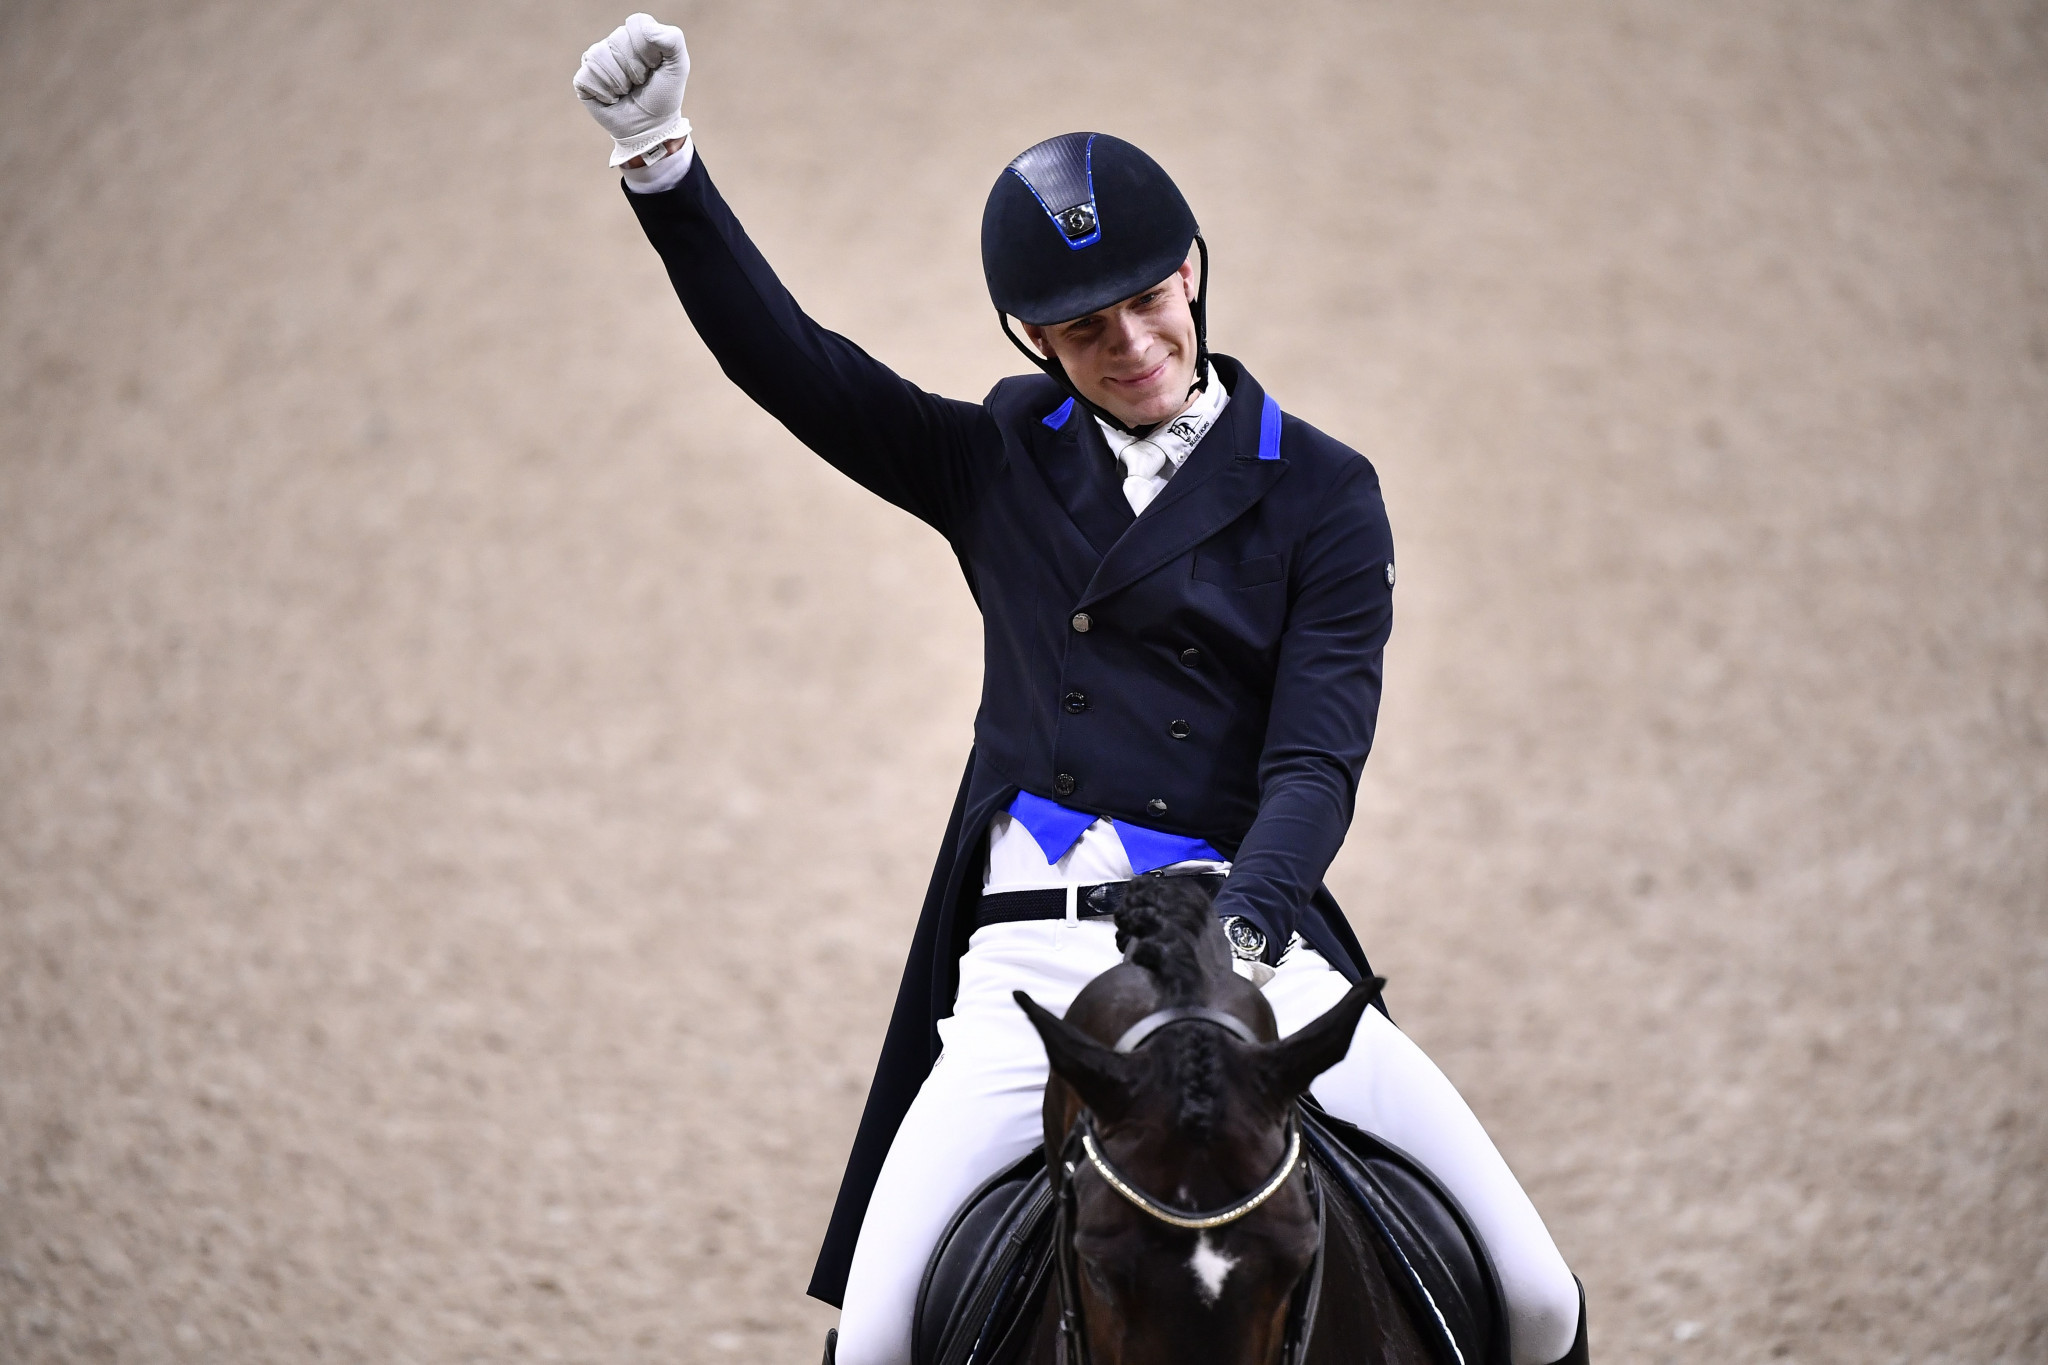 Denmark delight home crowd with FEI Dressage Nations Cup victory